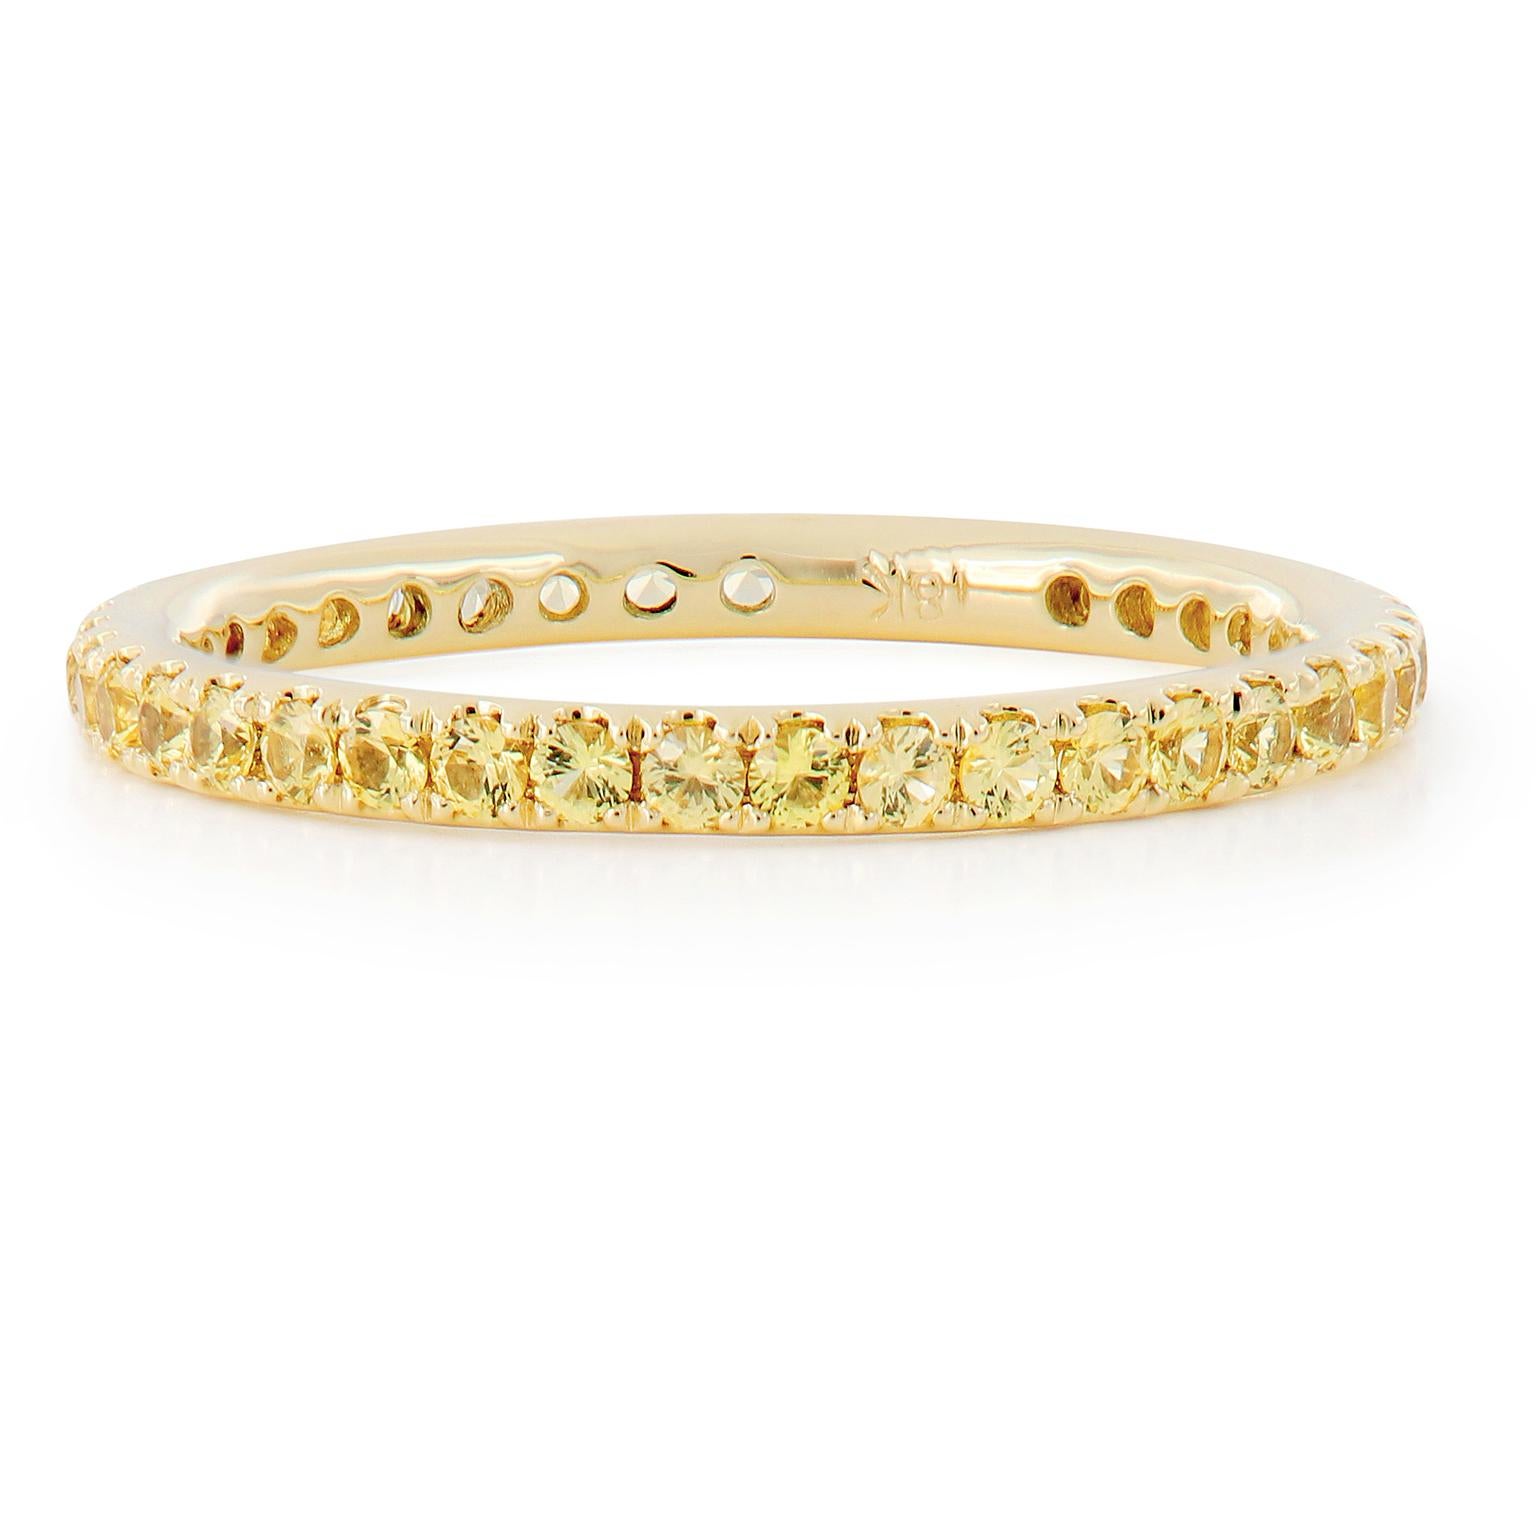 Sunny is this 18 karat gold and yellow sapphire eternity ring with 39 sapphires = 0.90 Cttw in a size 6! Sapphire is the birthstone for September and also given as a gem for the 5th, 23rd and 45th wedding anniversaries. This ring looks fantastic